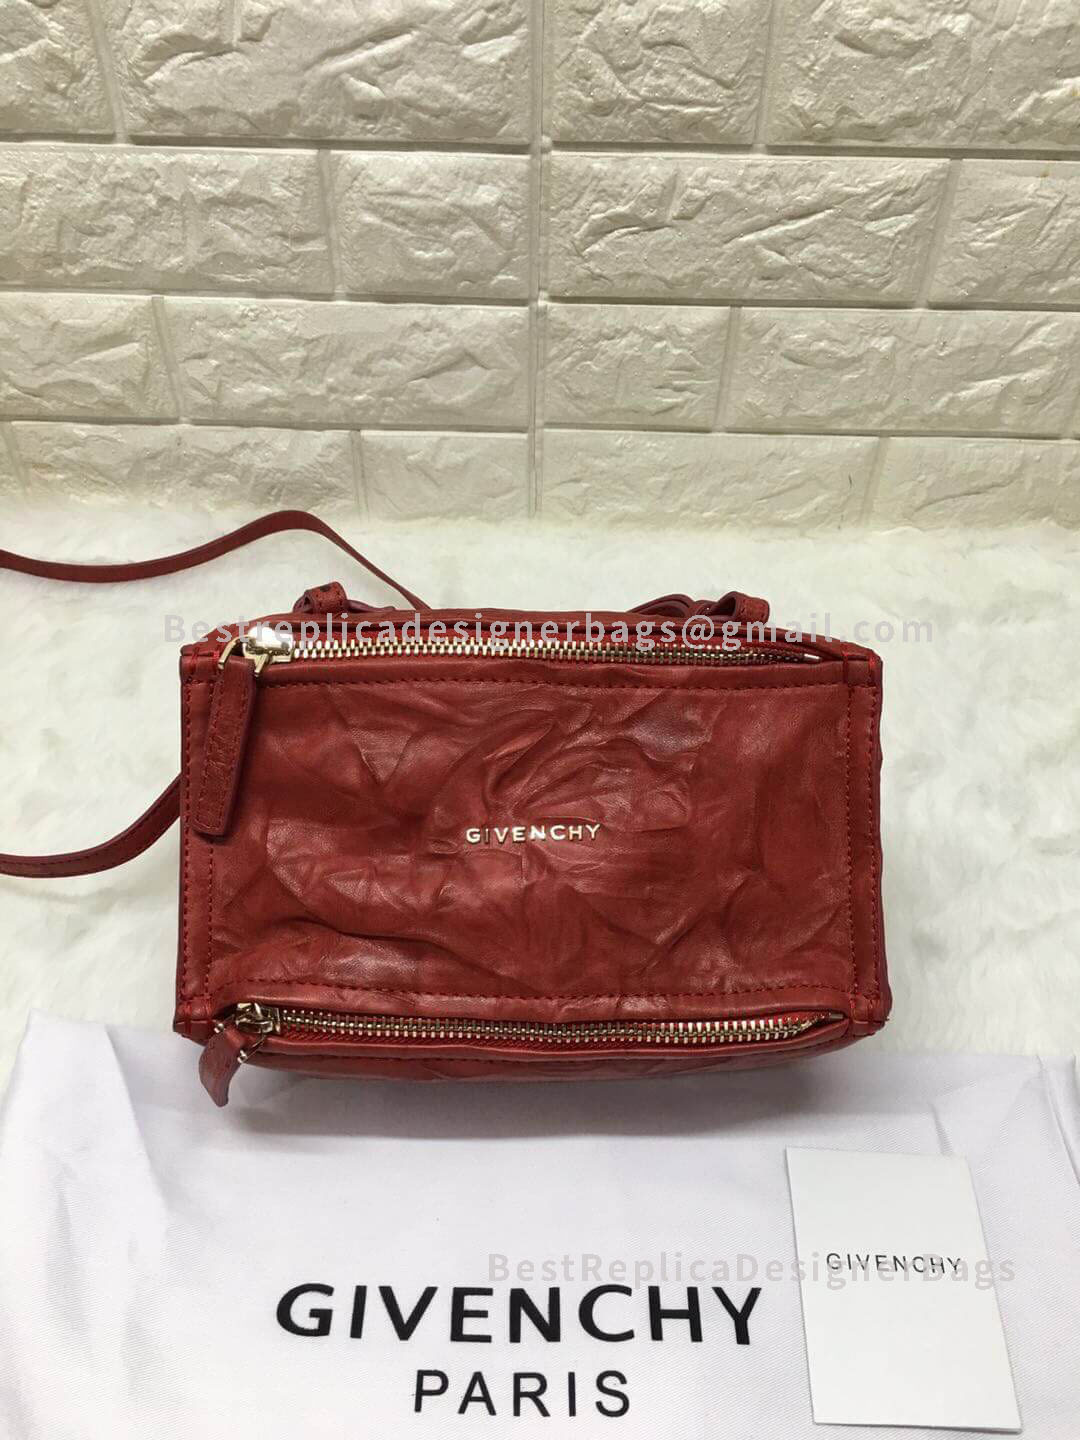 Givenchy Micro Pandora Bag In Aged Leather Red SHW 1-28610